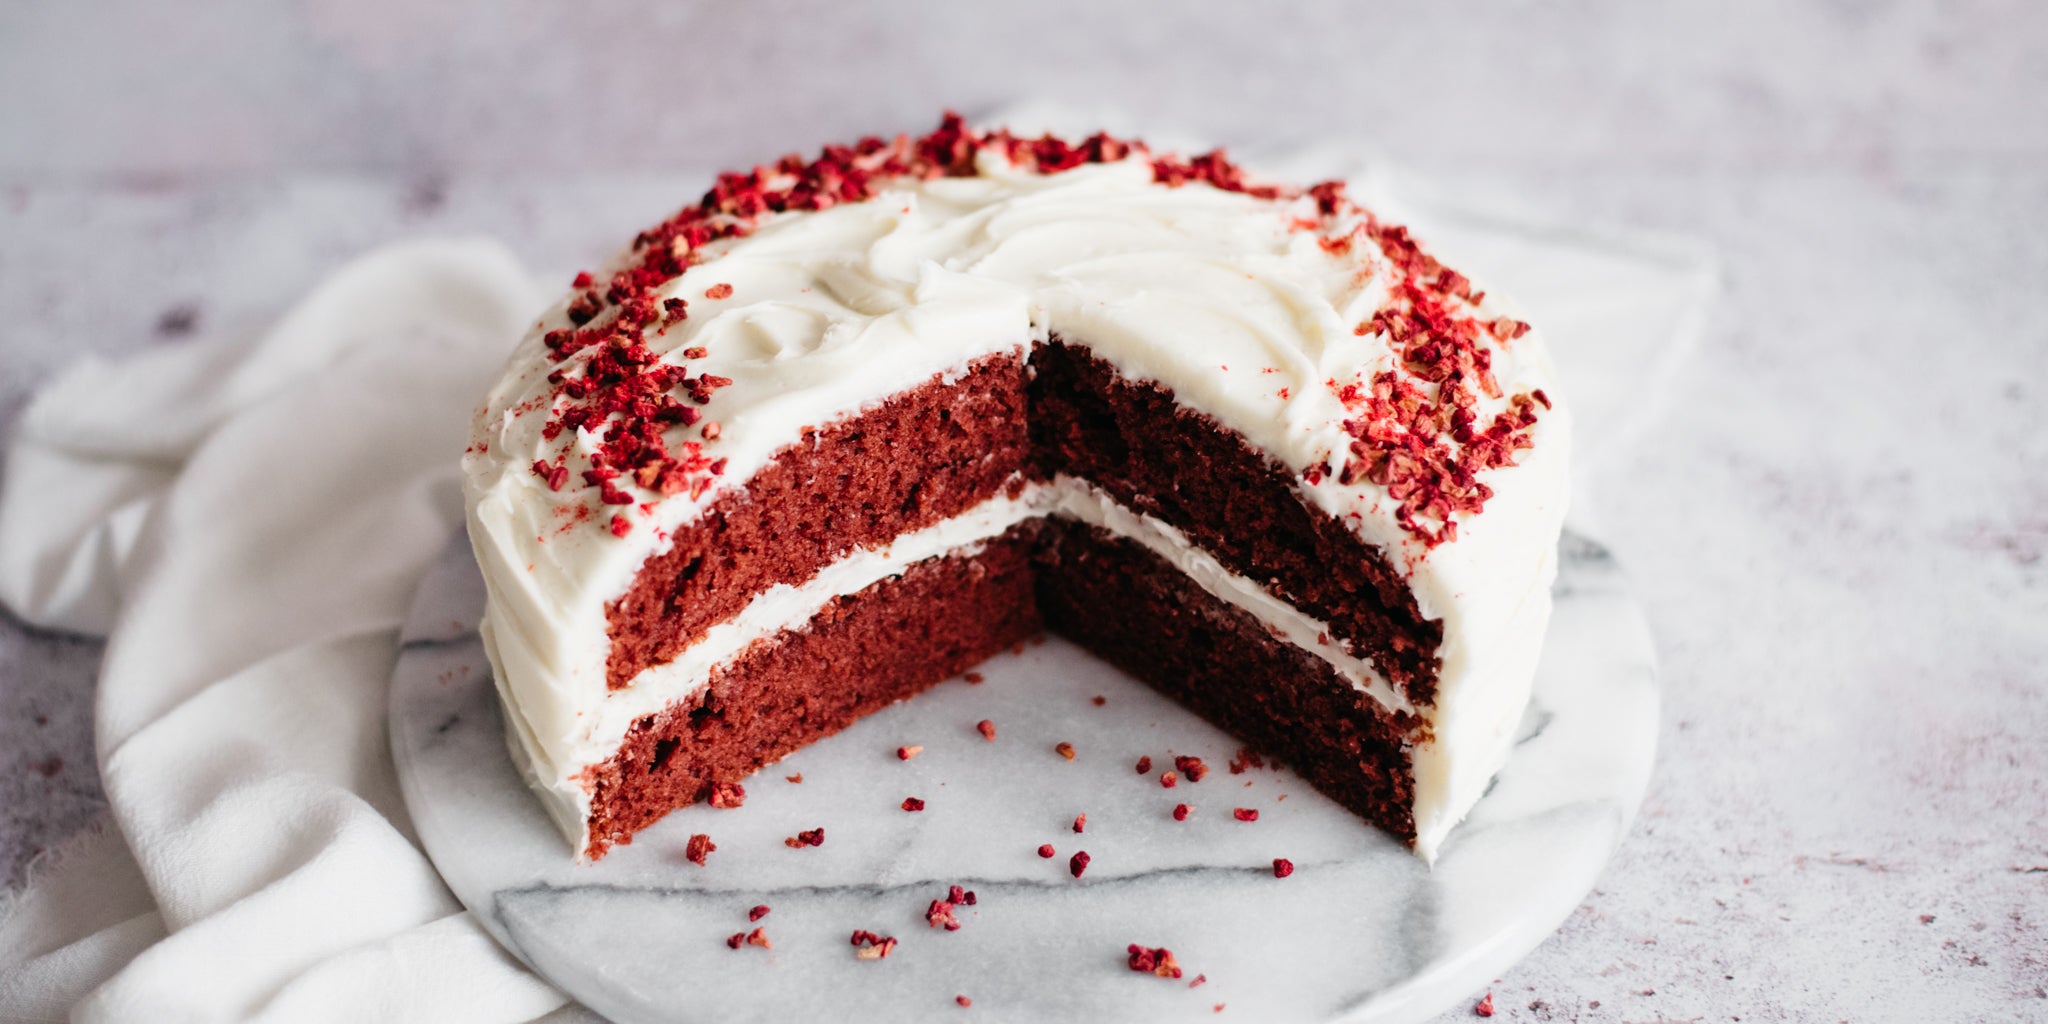 Red velvet cake with slices cut out of it, showing the two layers of the cake with cream cheese icing in between